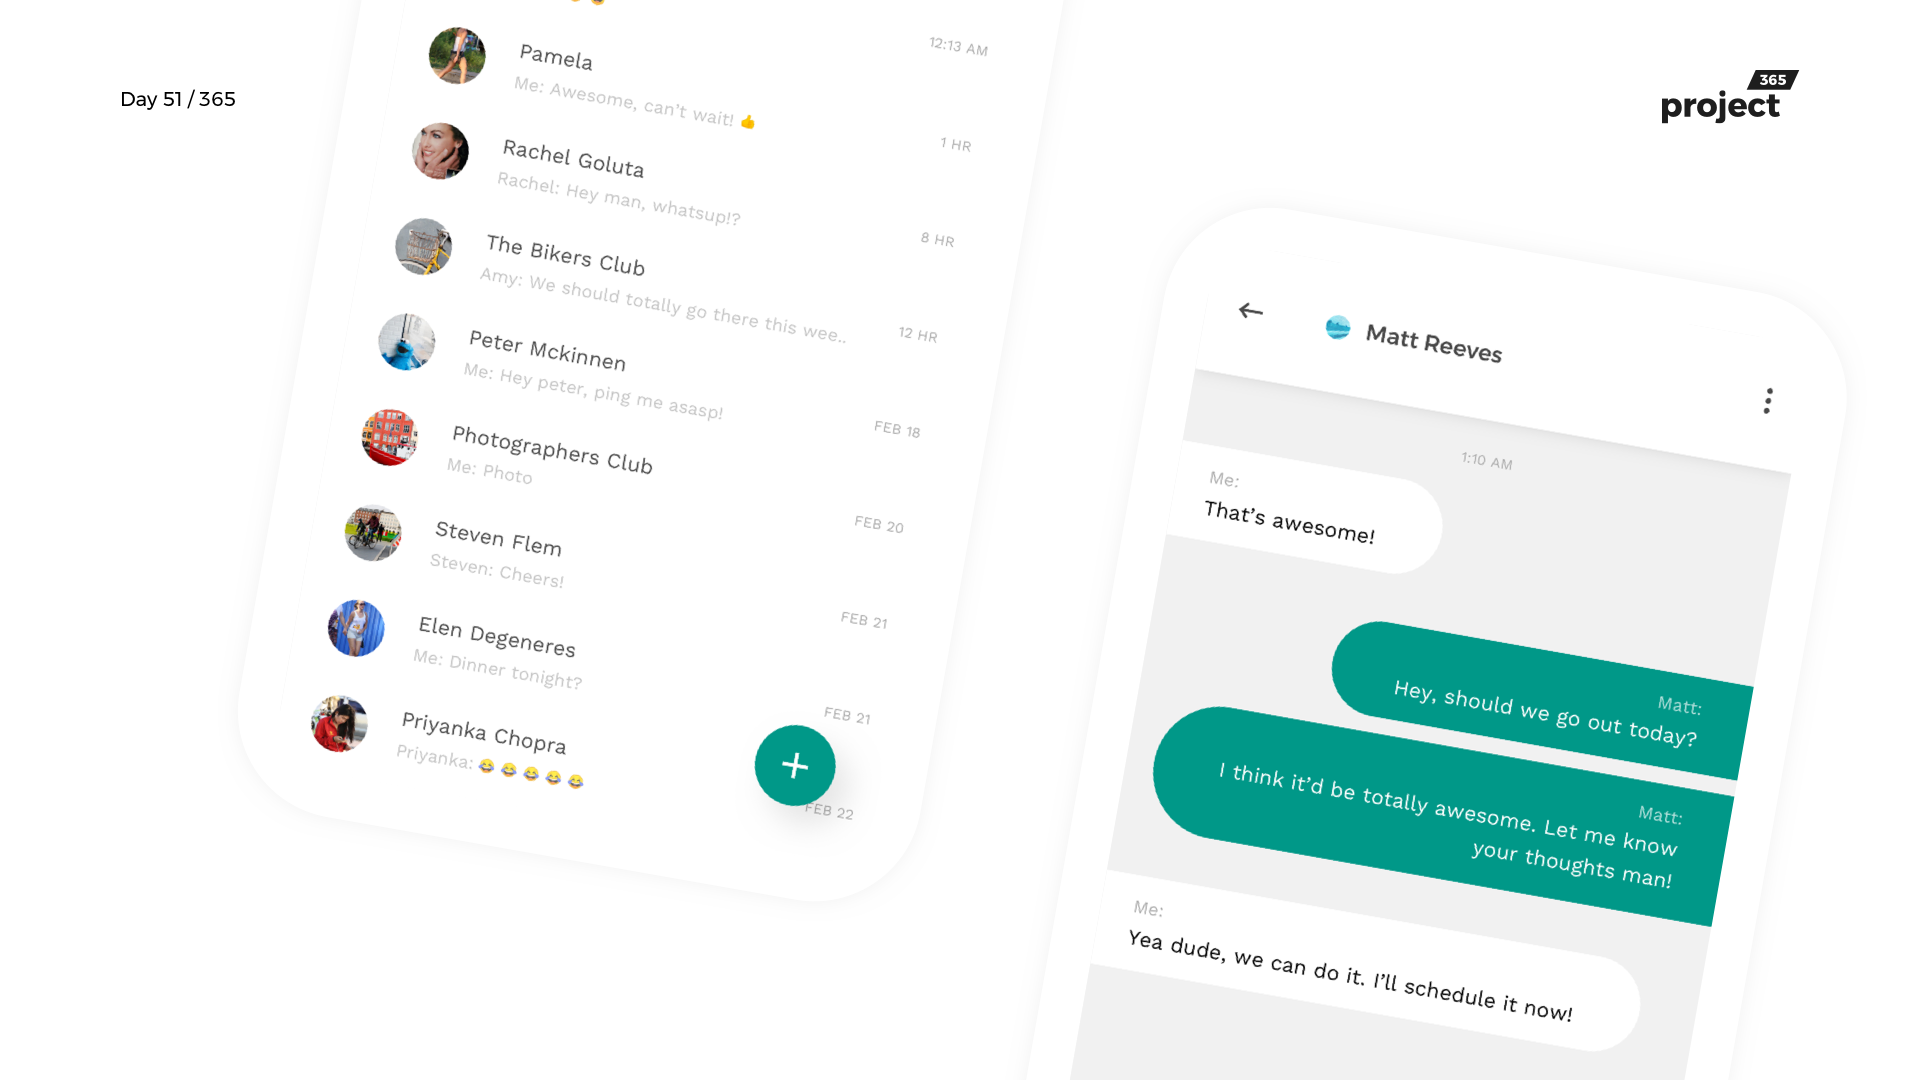 Day 51 – WhatsApp Redesign Concept